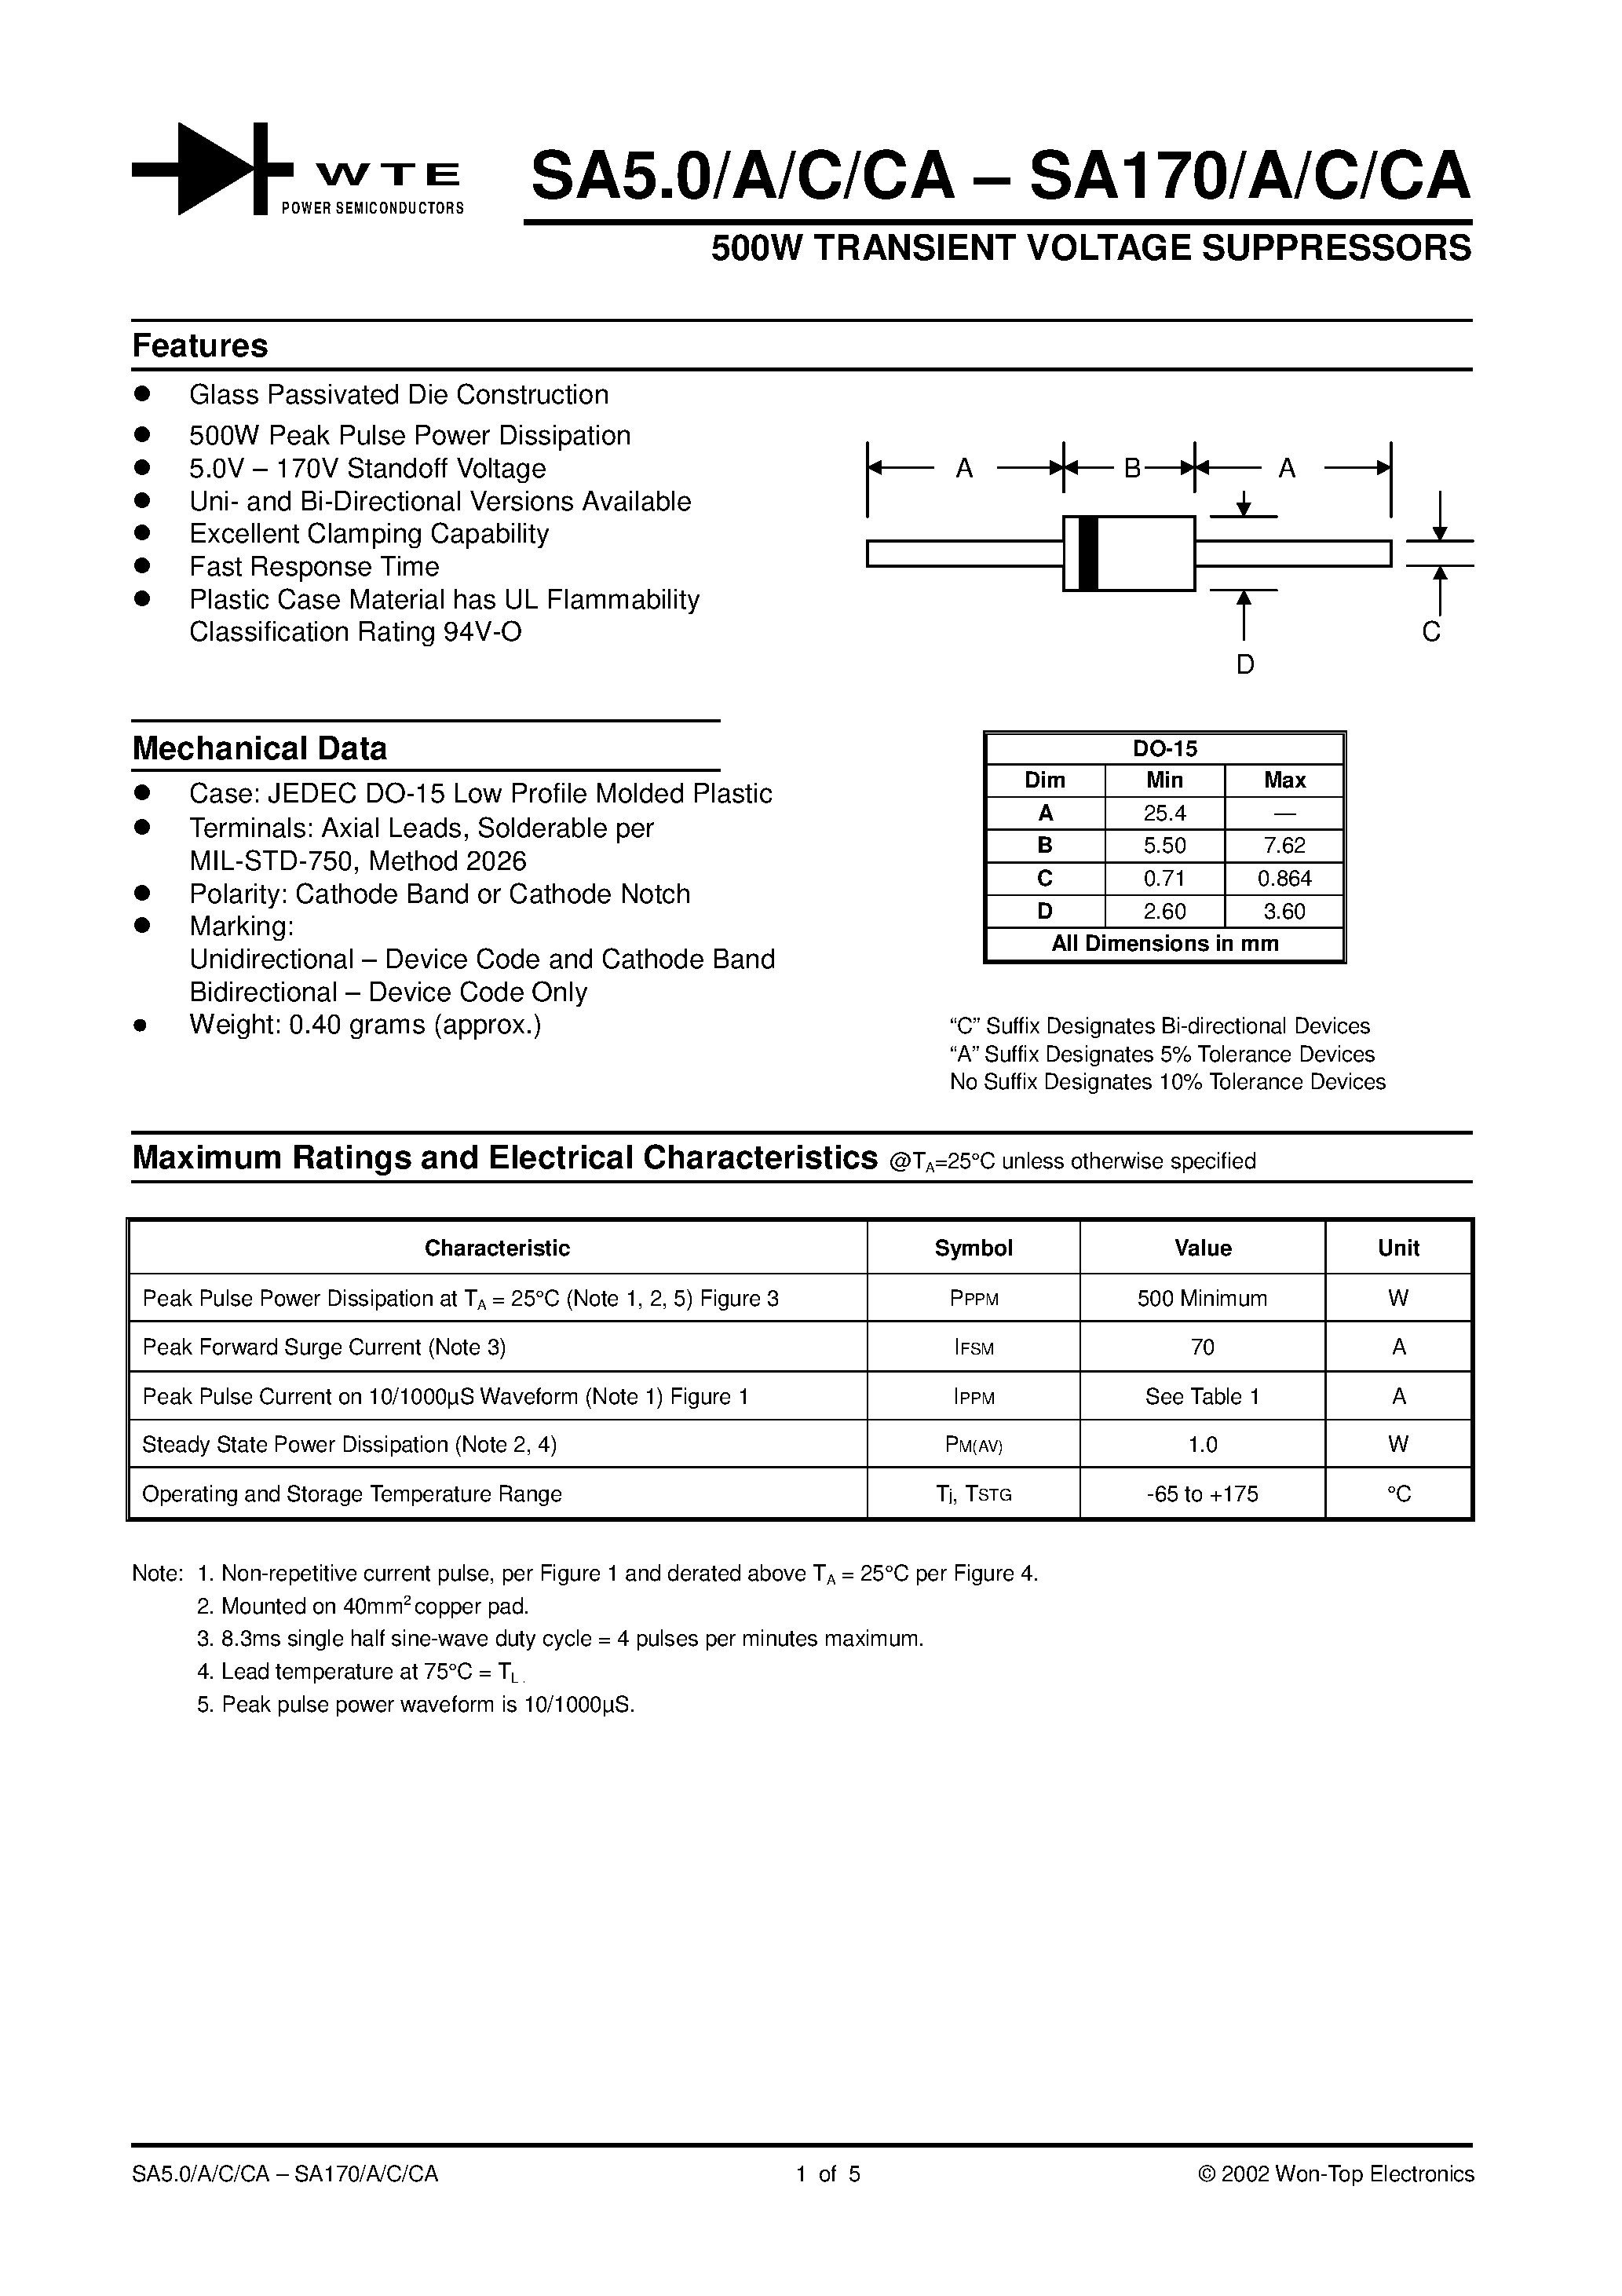 Datasheet SA30A - 500W TRANSIENT VOLTAGE SUPPRESSORS page 1